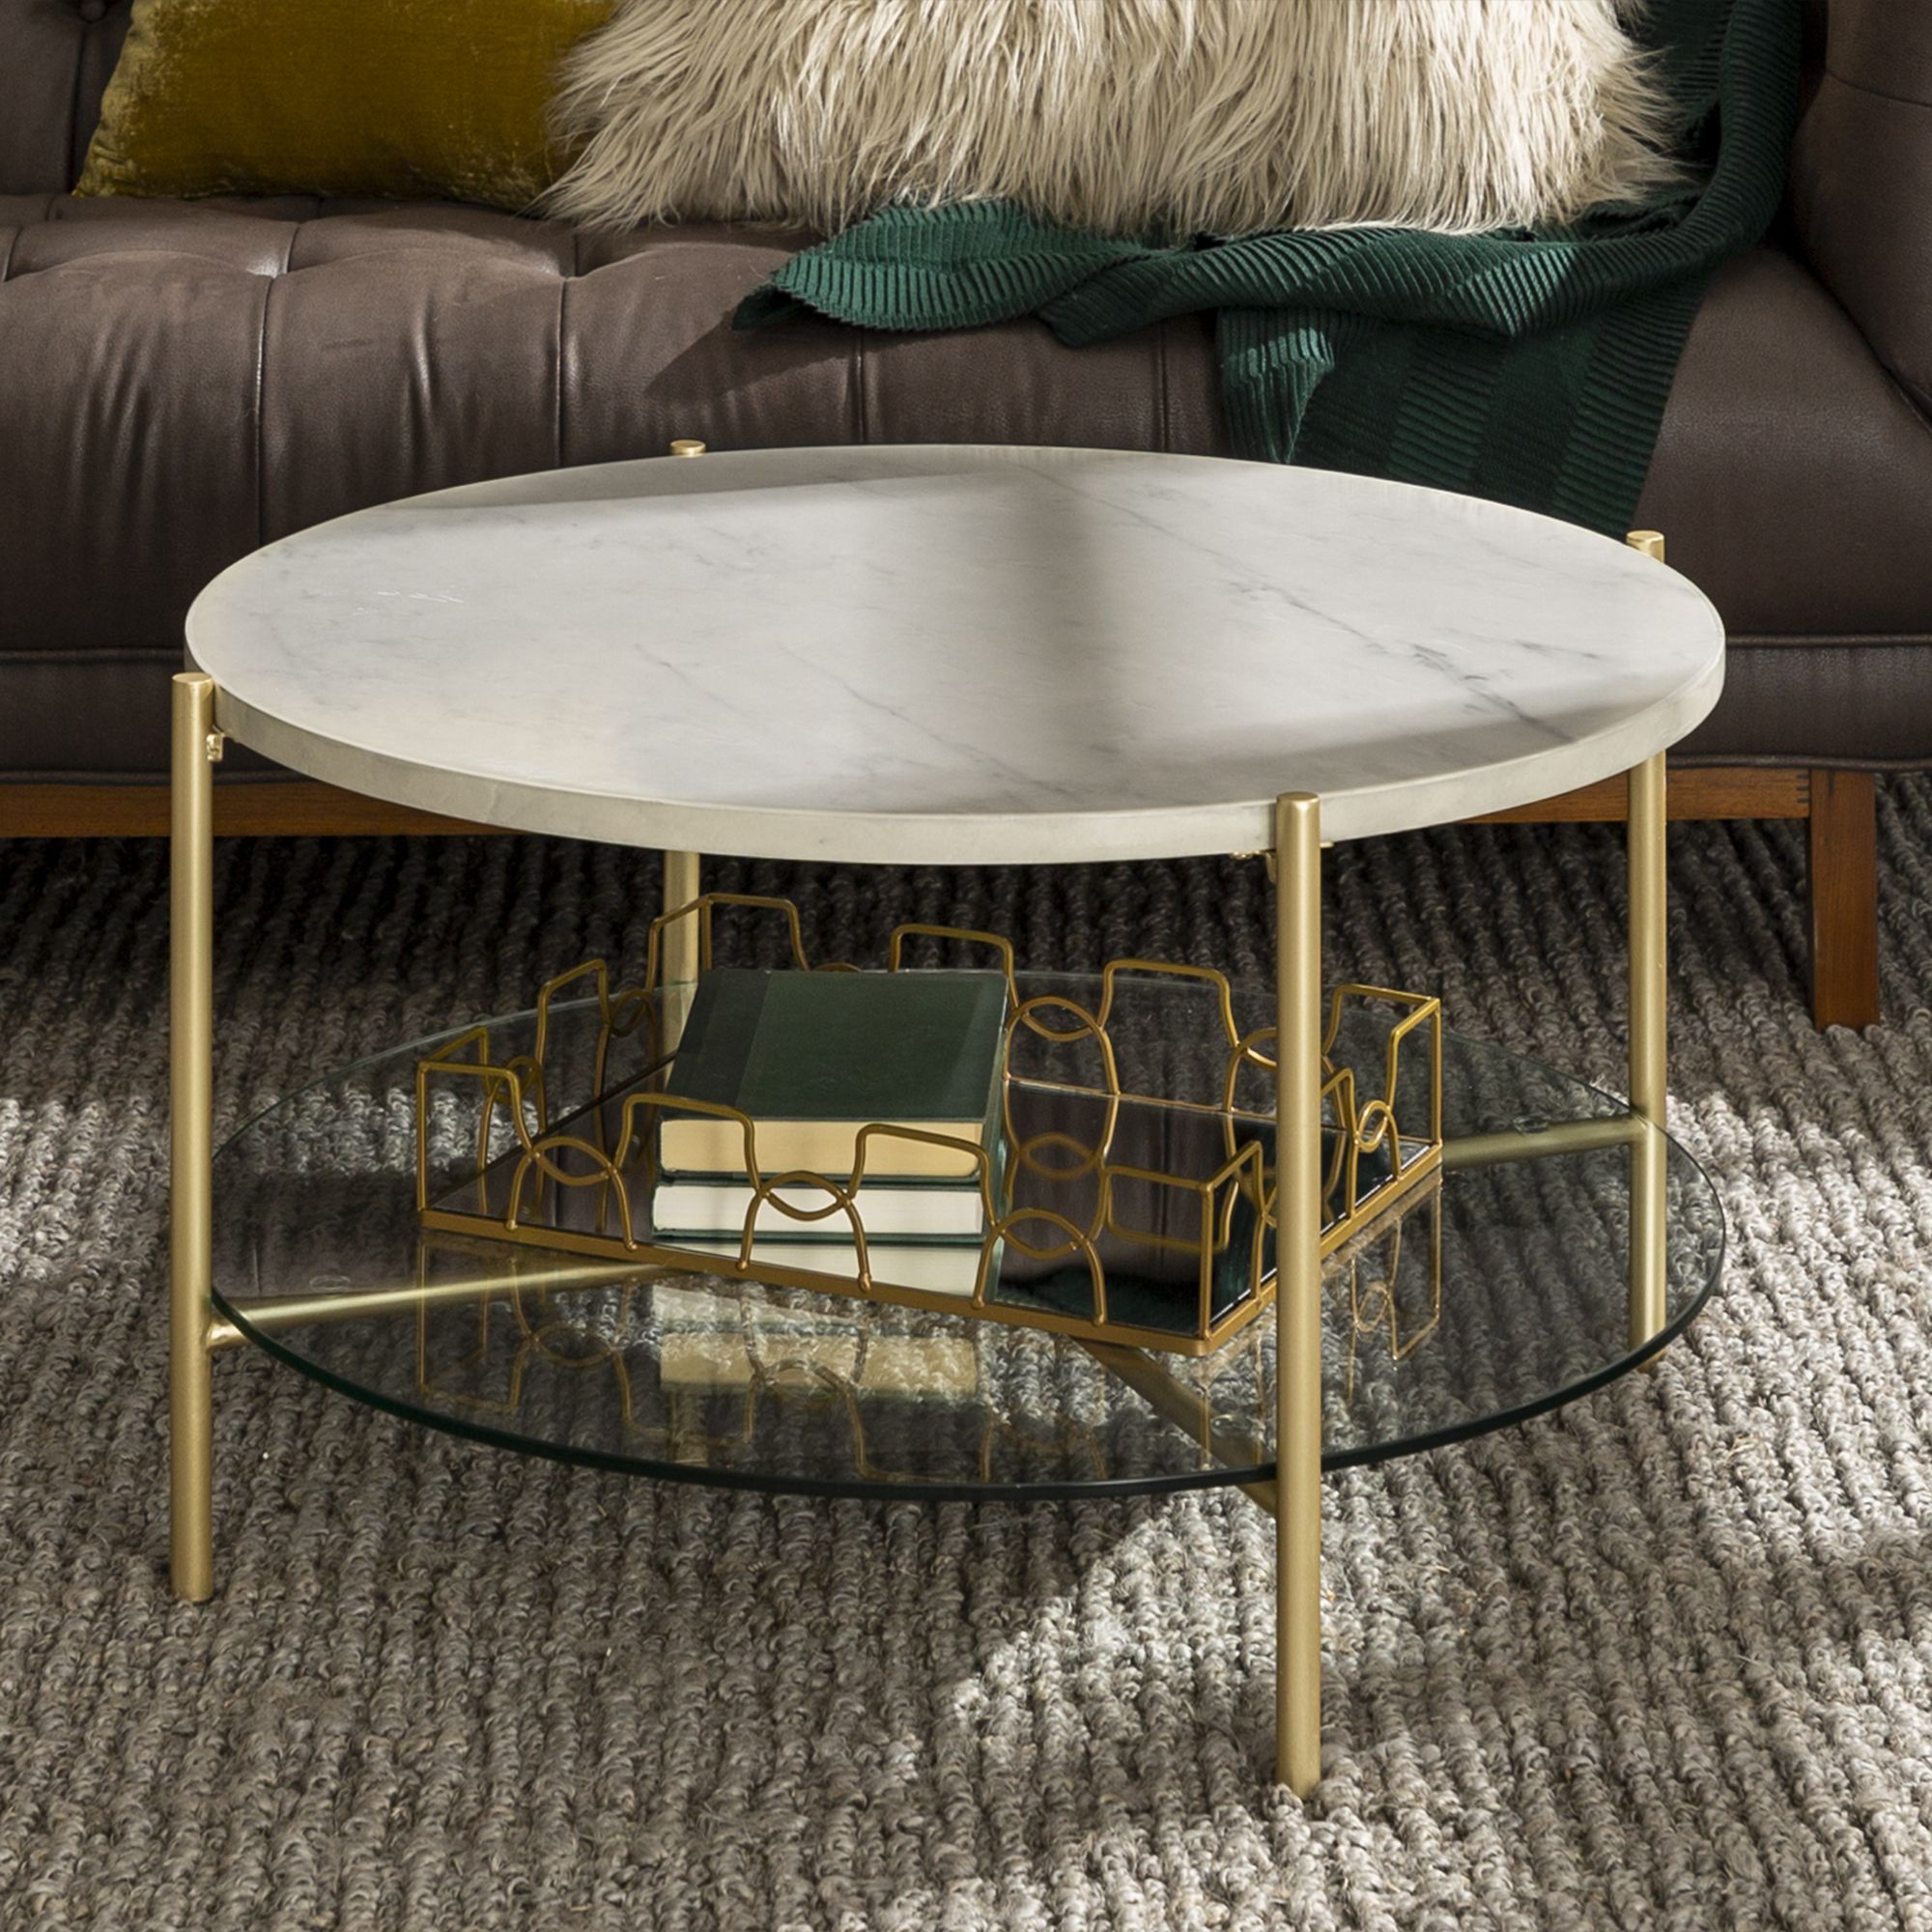 Manor Park Mid Century Round Coffee Table, White Marble Pertaining To Marble And White Coffee Tables (View 2 of 15)